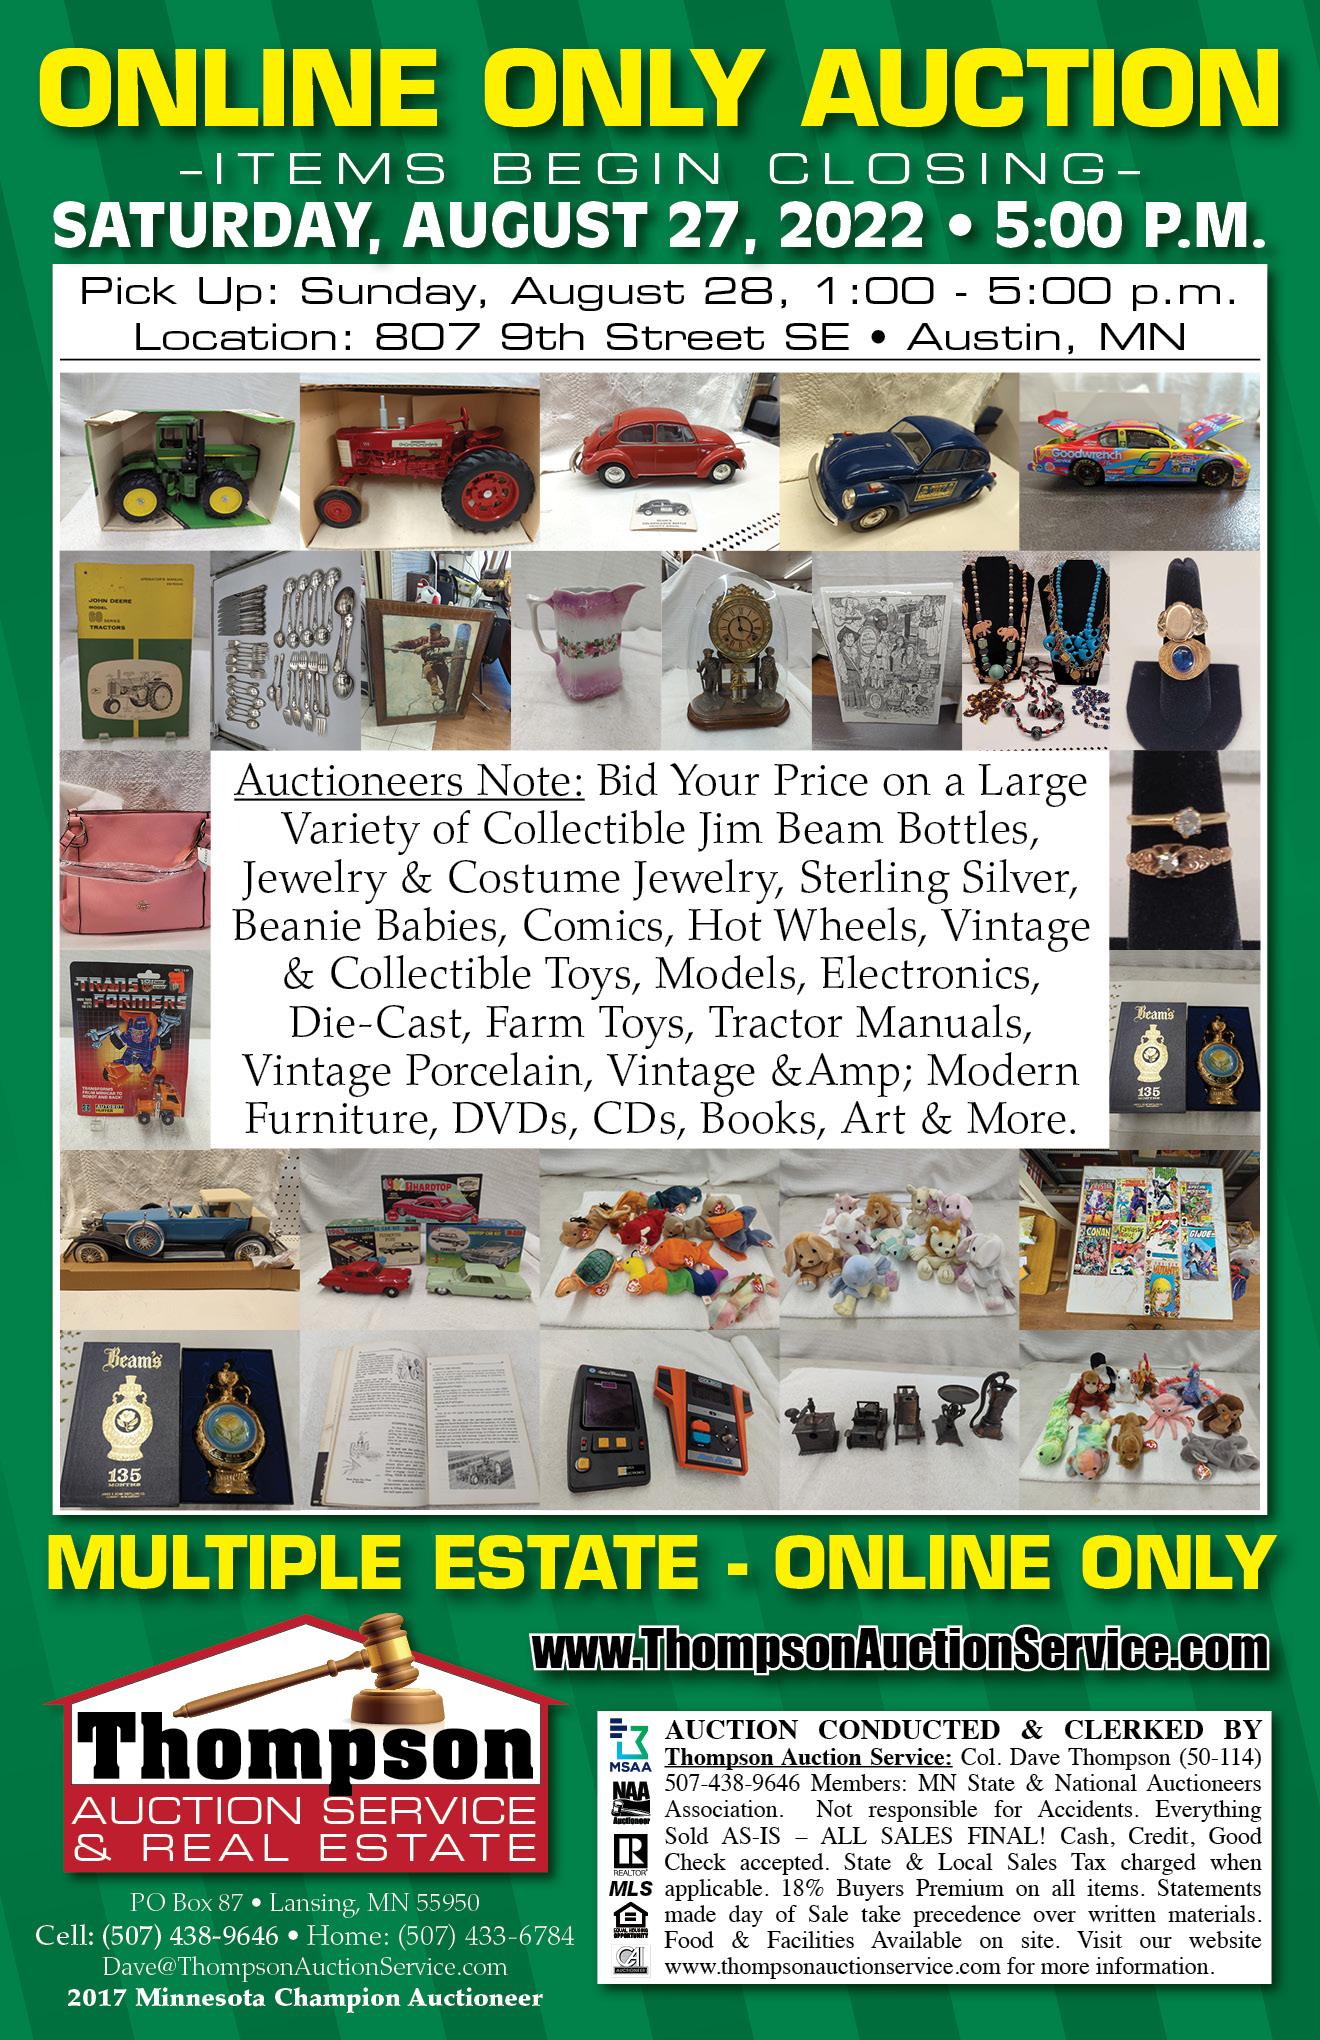 Multi-Estate Online Only Auction